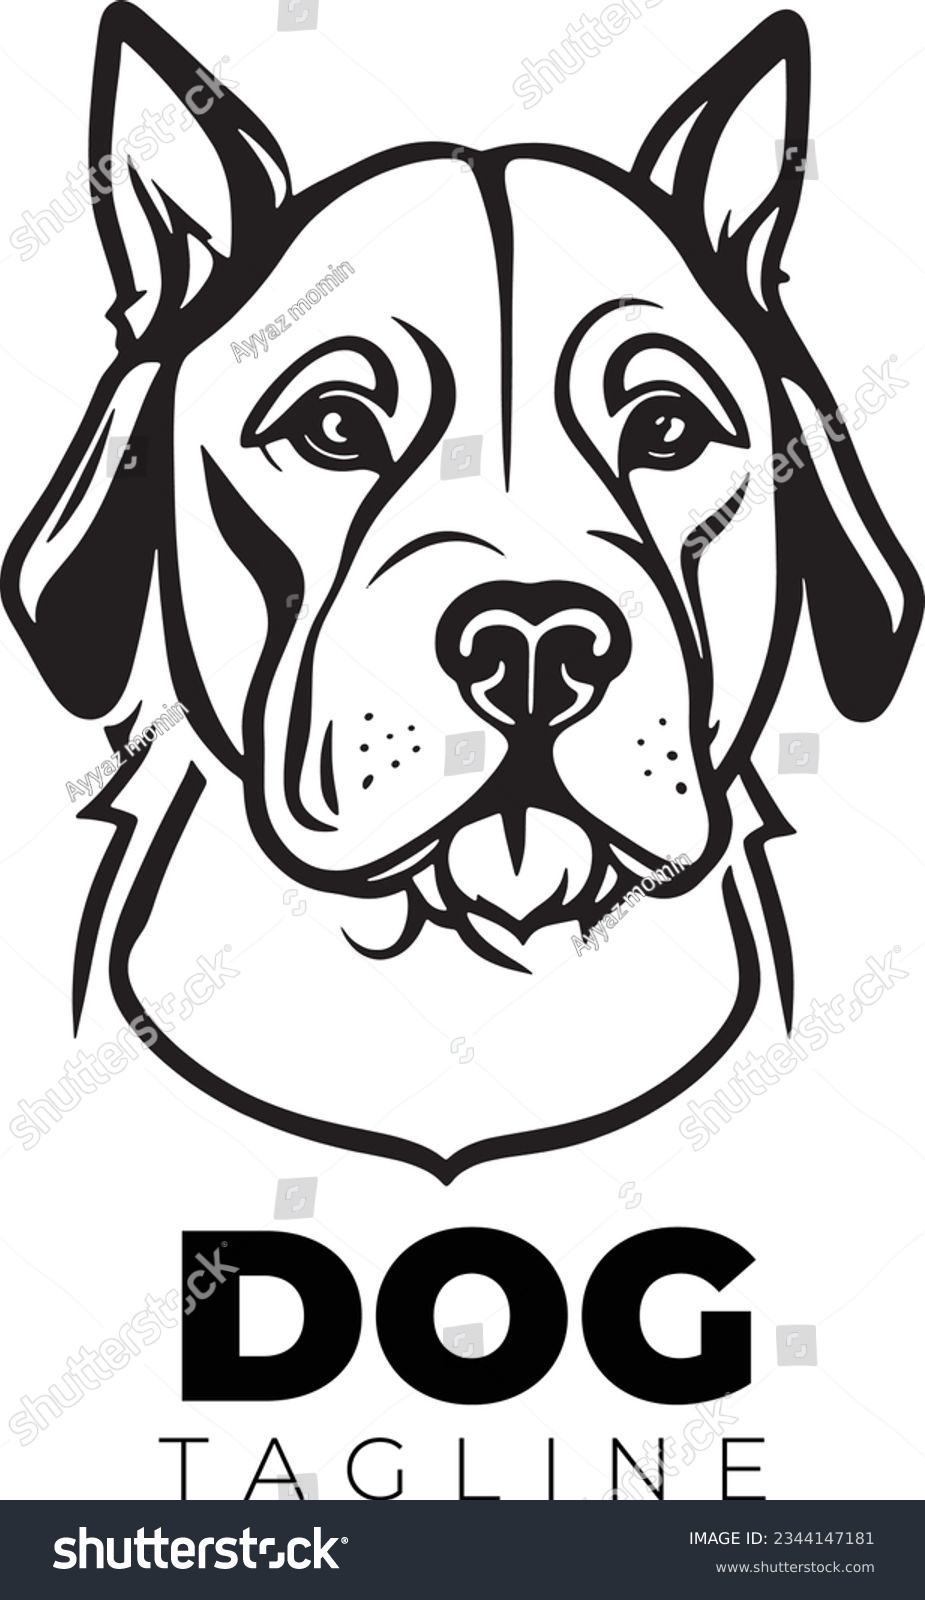 SVG of american pit bull terrier, american pit bull terrier Dog Face SVG, black and white american pit bull terrier vector svg